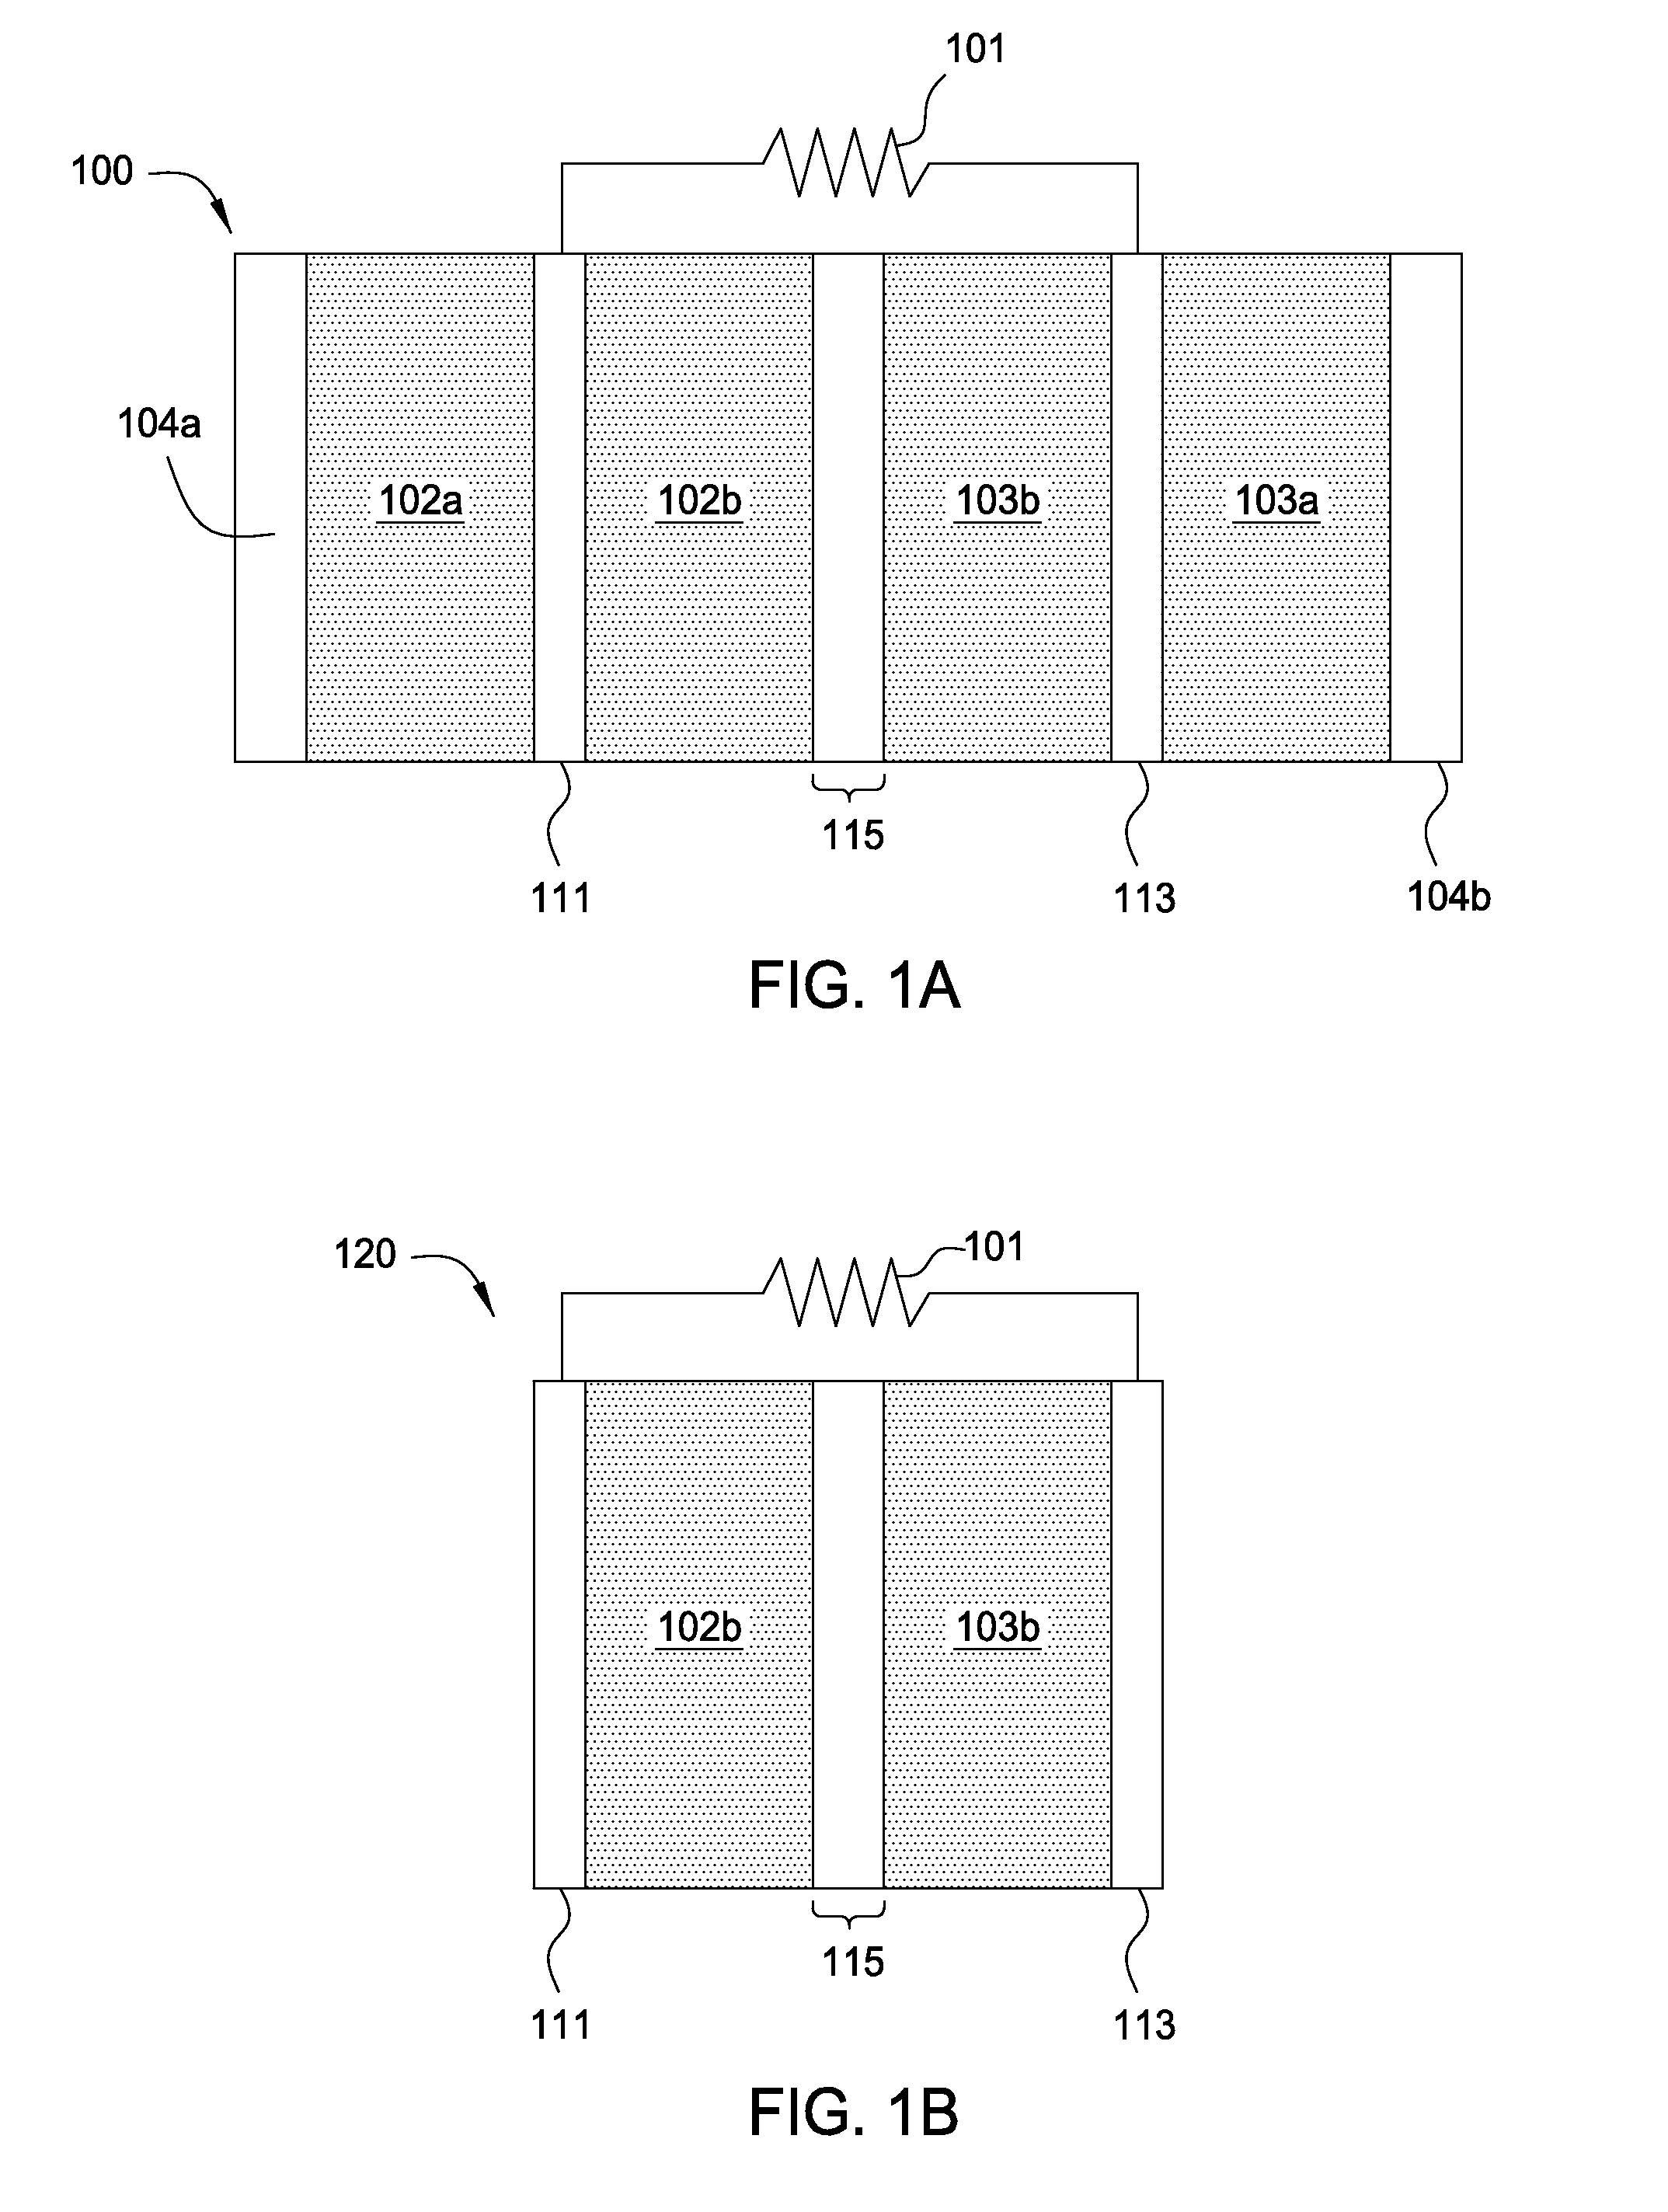 Multi-layer battery electrode design for enabling thicker electrode fabrication